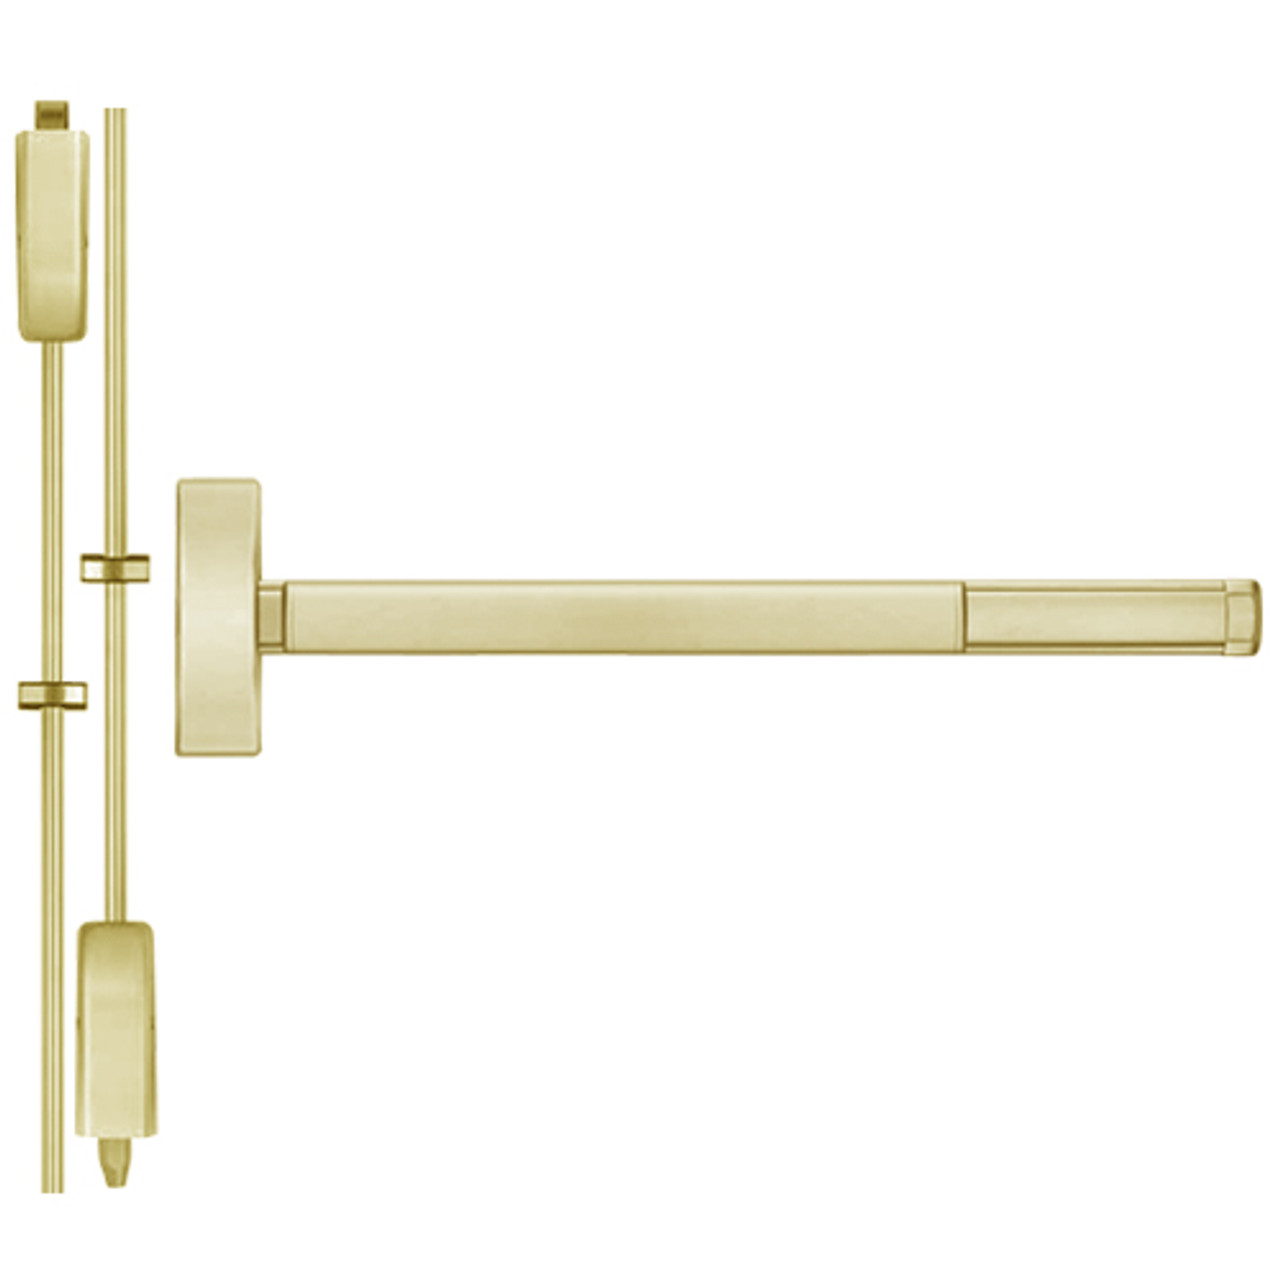 MLR2202-606-36 PHI 2200 Series Non Fire Rated Apex Surface Vertical Rod Device with Motorized Latch Retraction Prepped for Dummy Trim in Satin Brass Finish